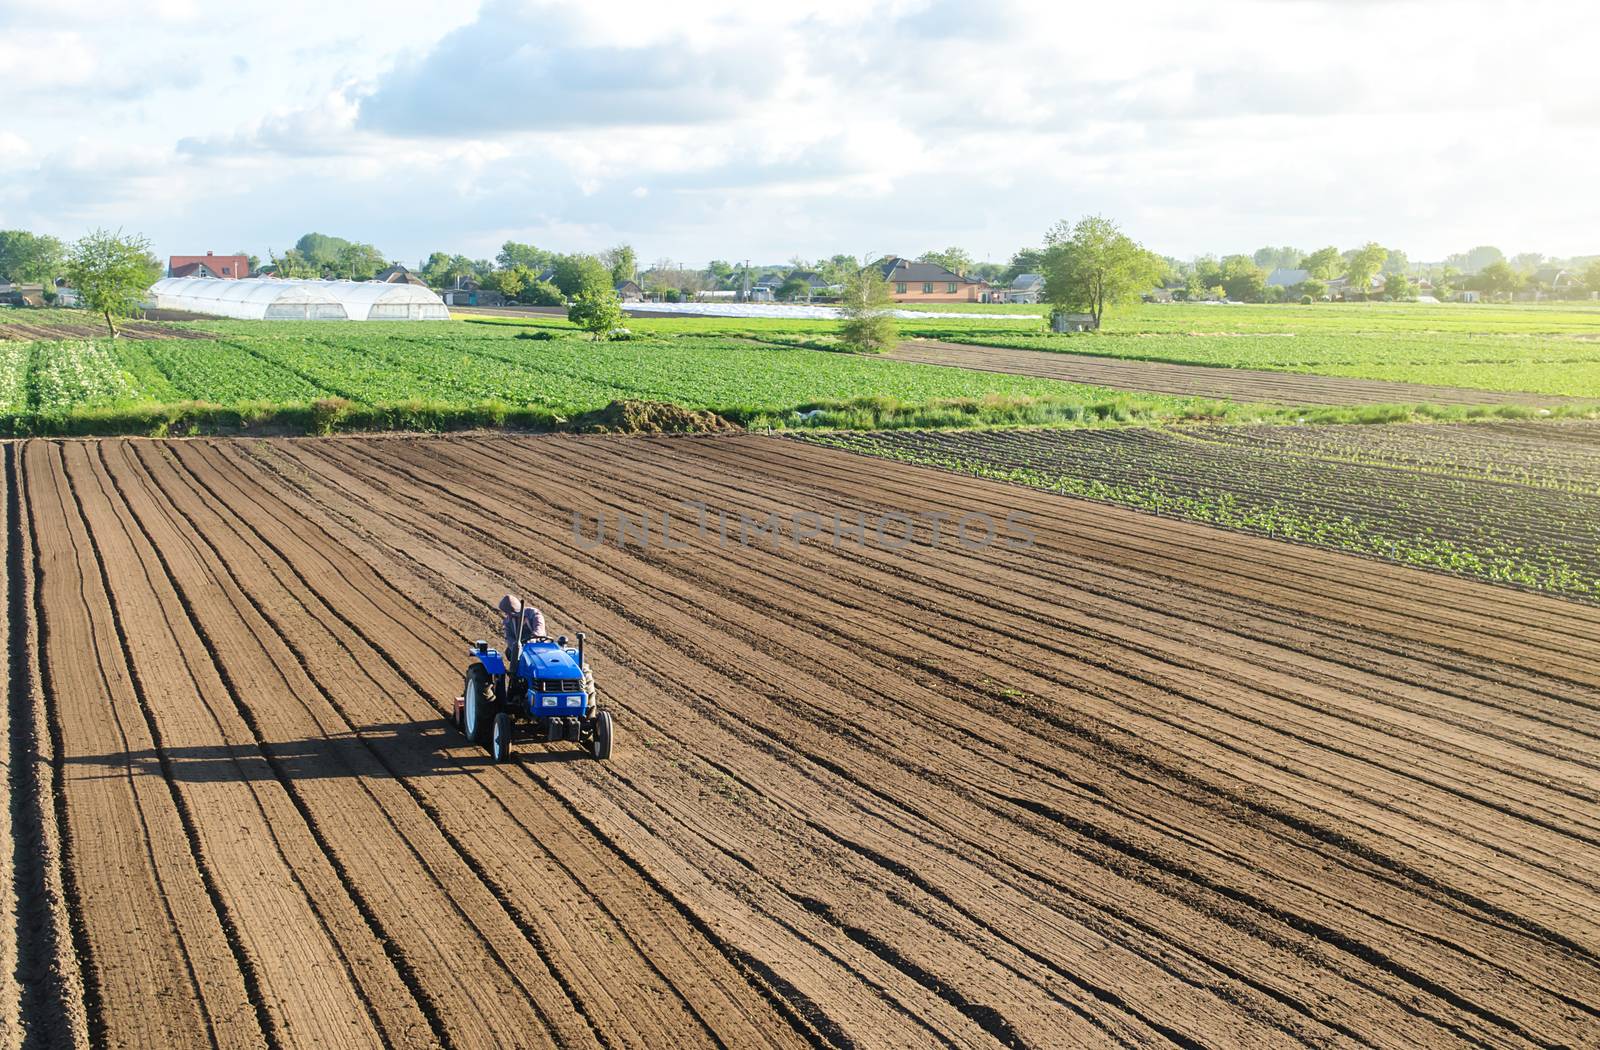 A farmer on a tractor processes a farm field. Farming and agriculture. Preparing the land for a new crop planting. Loosening the surface, cultivating soil for further planting. Work on the ground